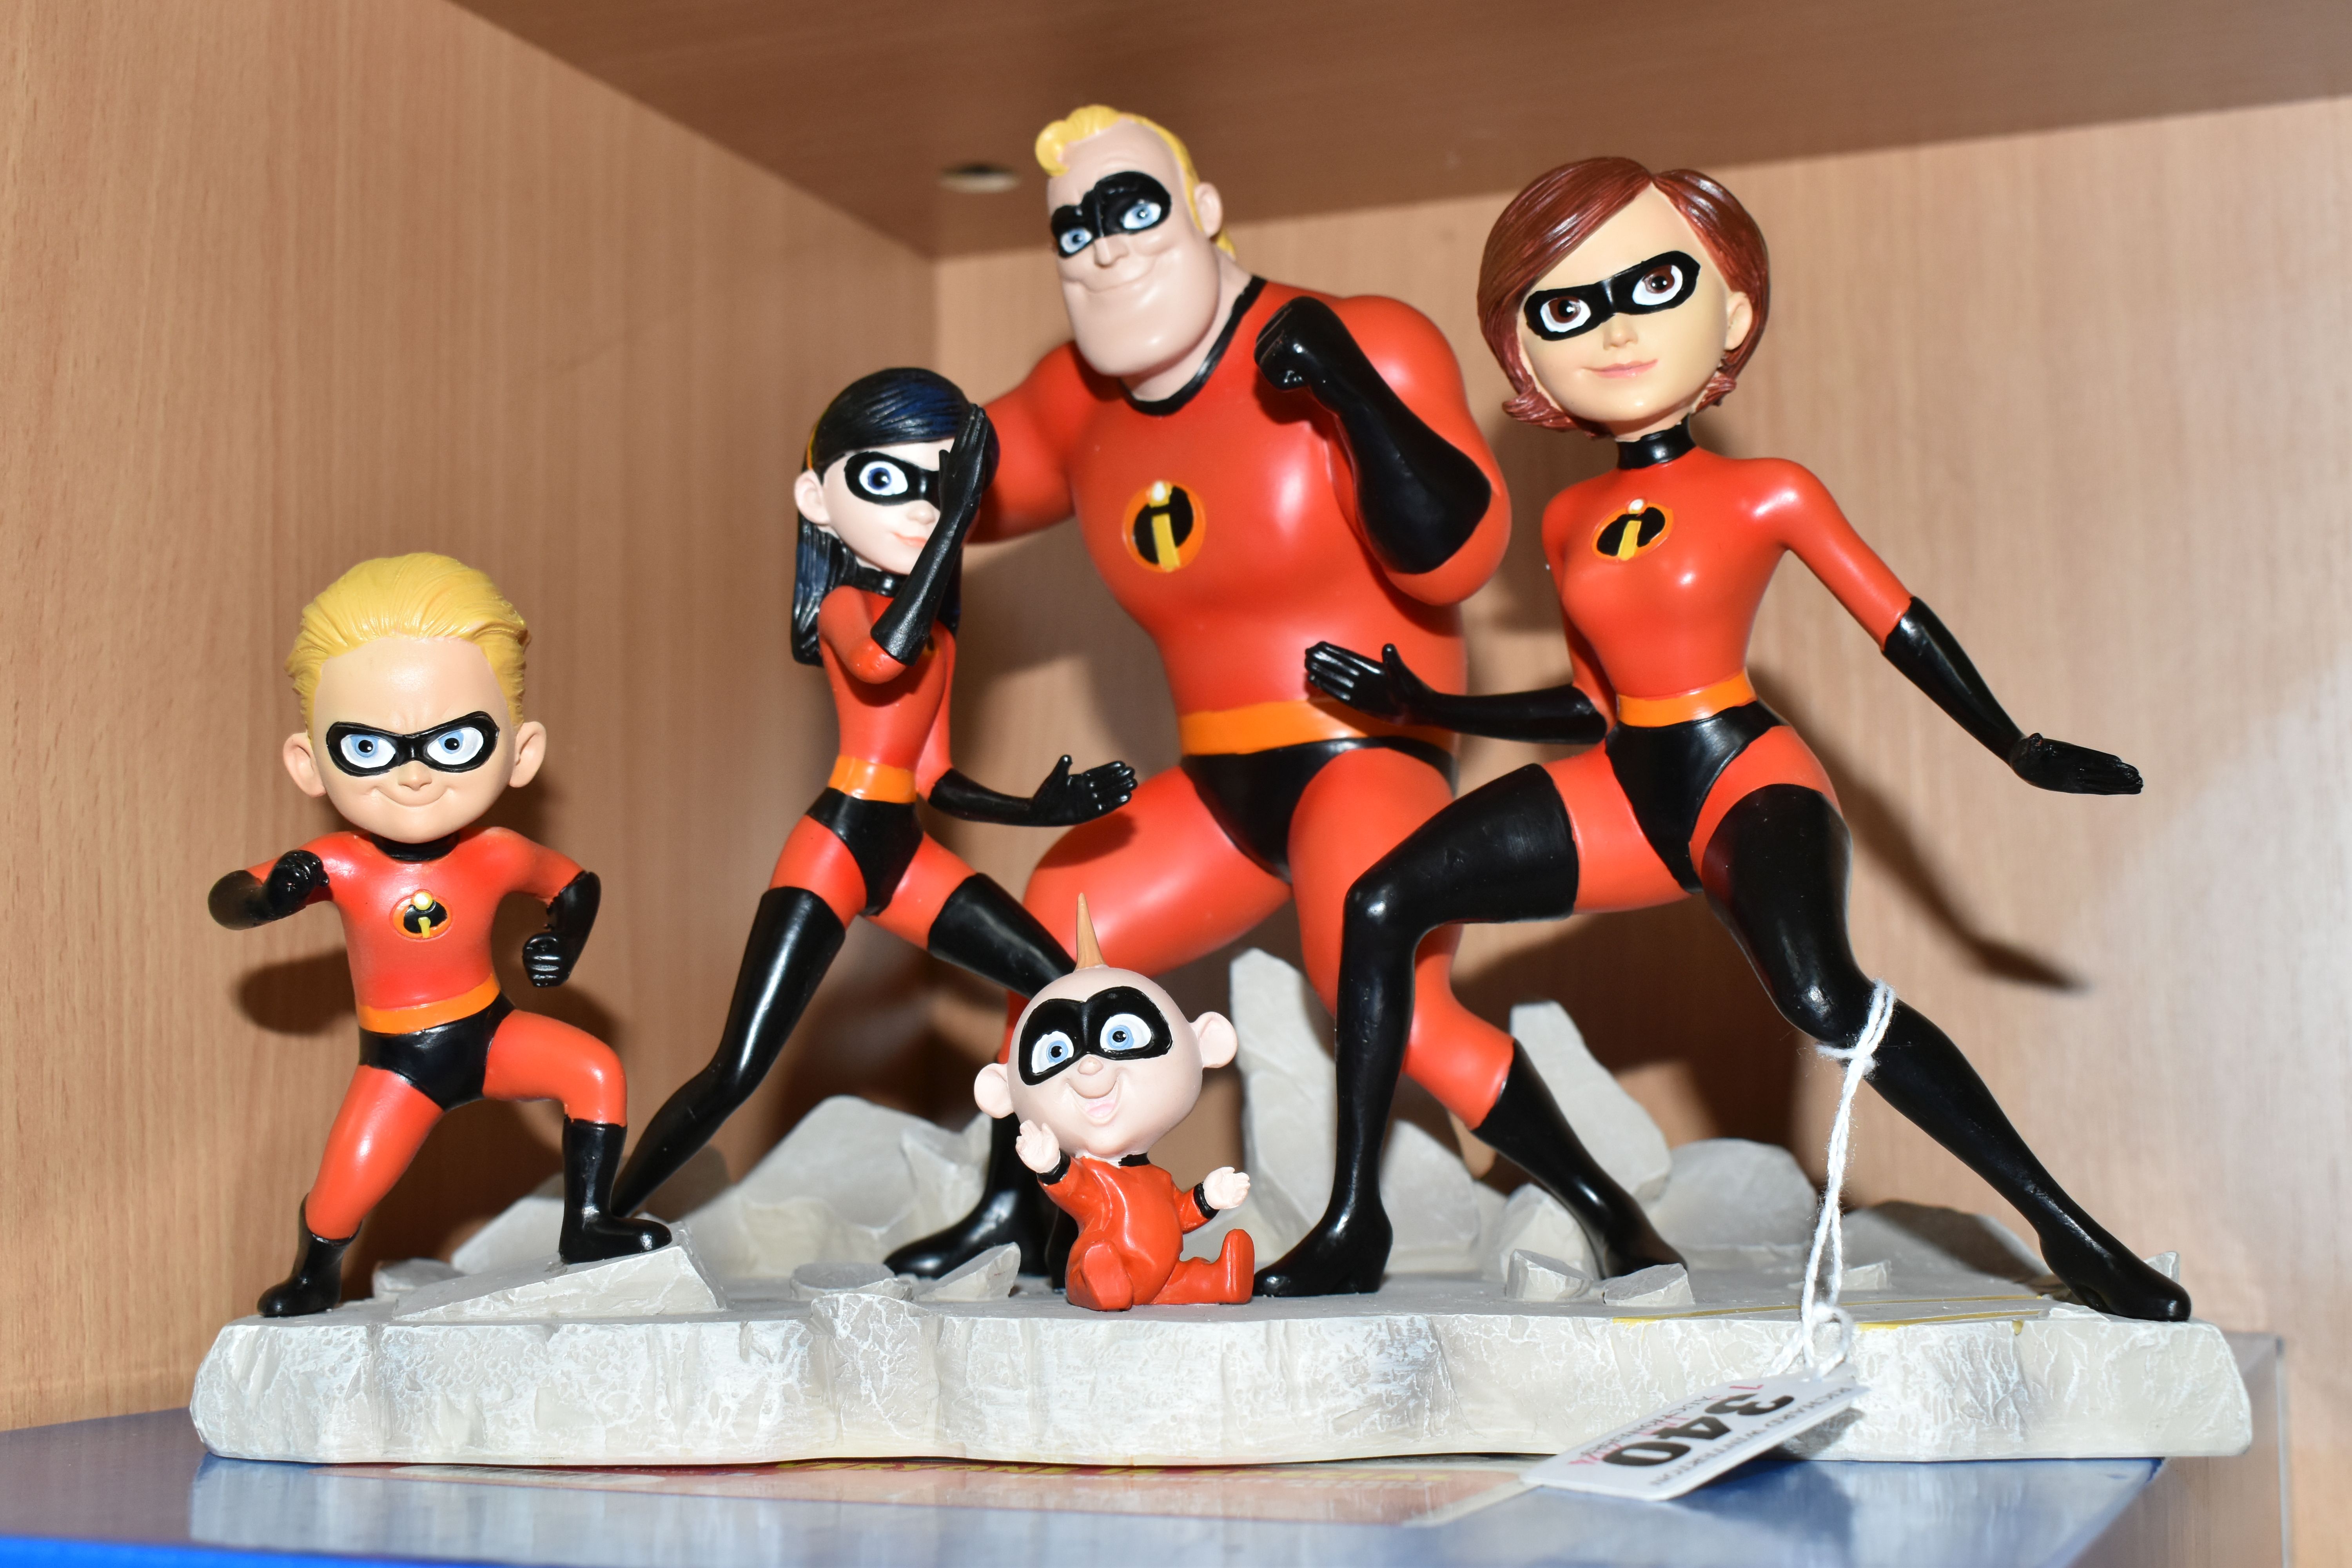 A BOXED ENESCO DISNEY ENCHANTING COLLECTION - 'EVERYONE IS SPECIAL', THE INCREDIBLES FIGURINE - Image 3 of 4